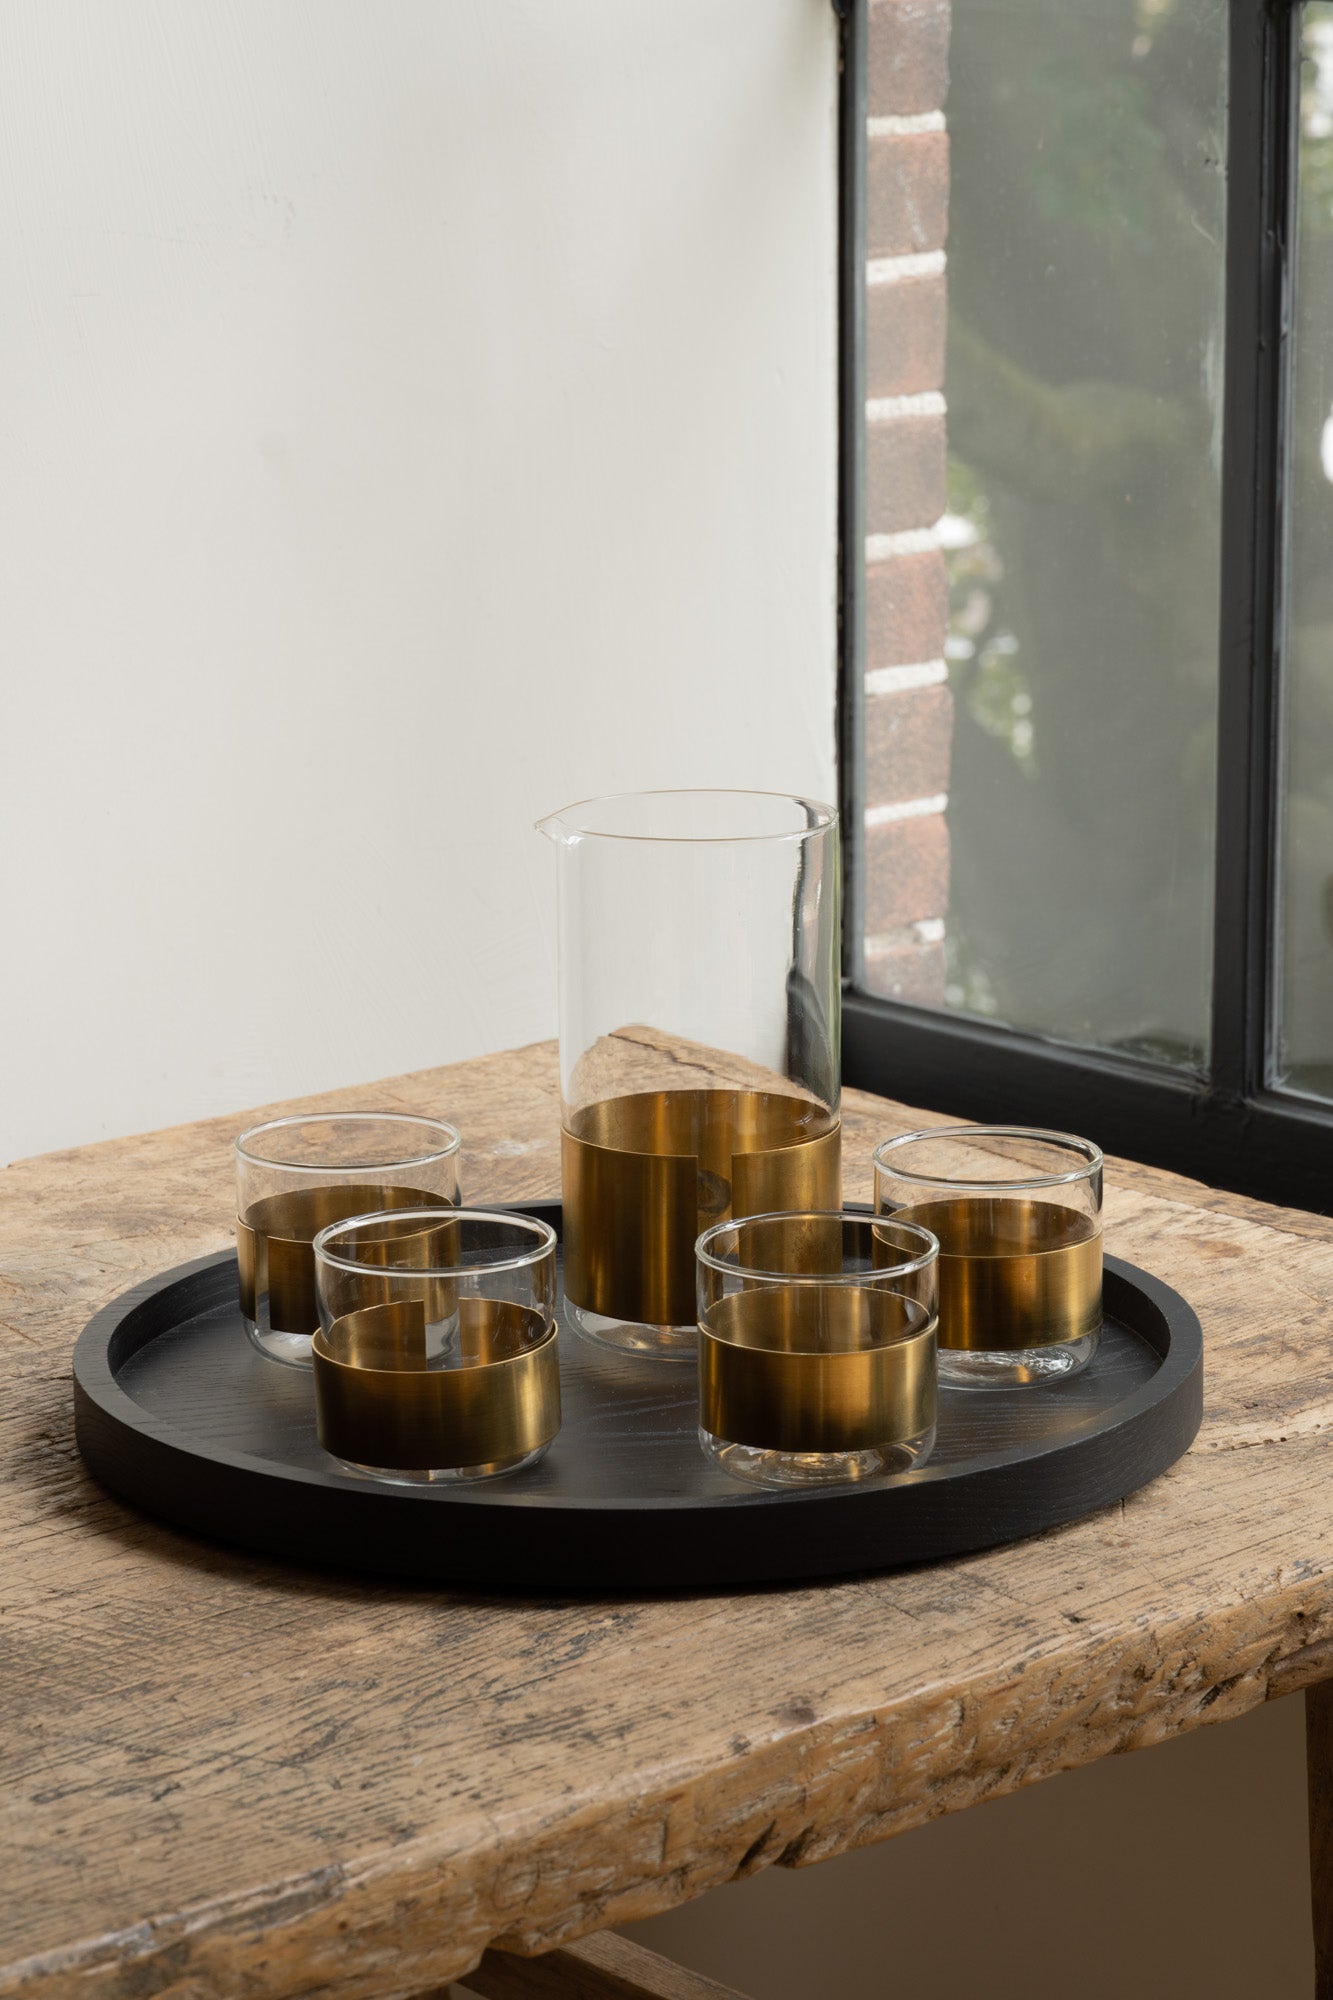 Copper Alchemy Carafe by Serax as a set with the glasses on a black round wooden serving tray.